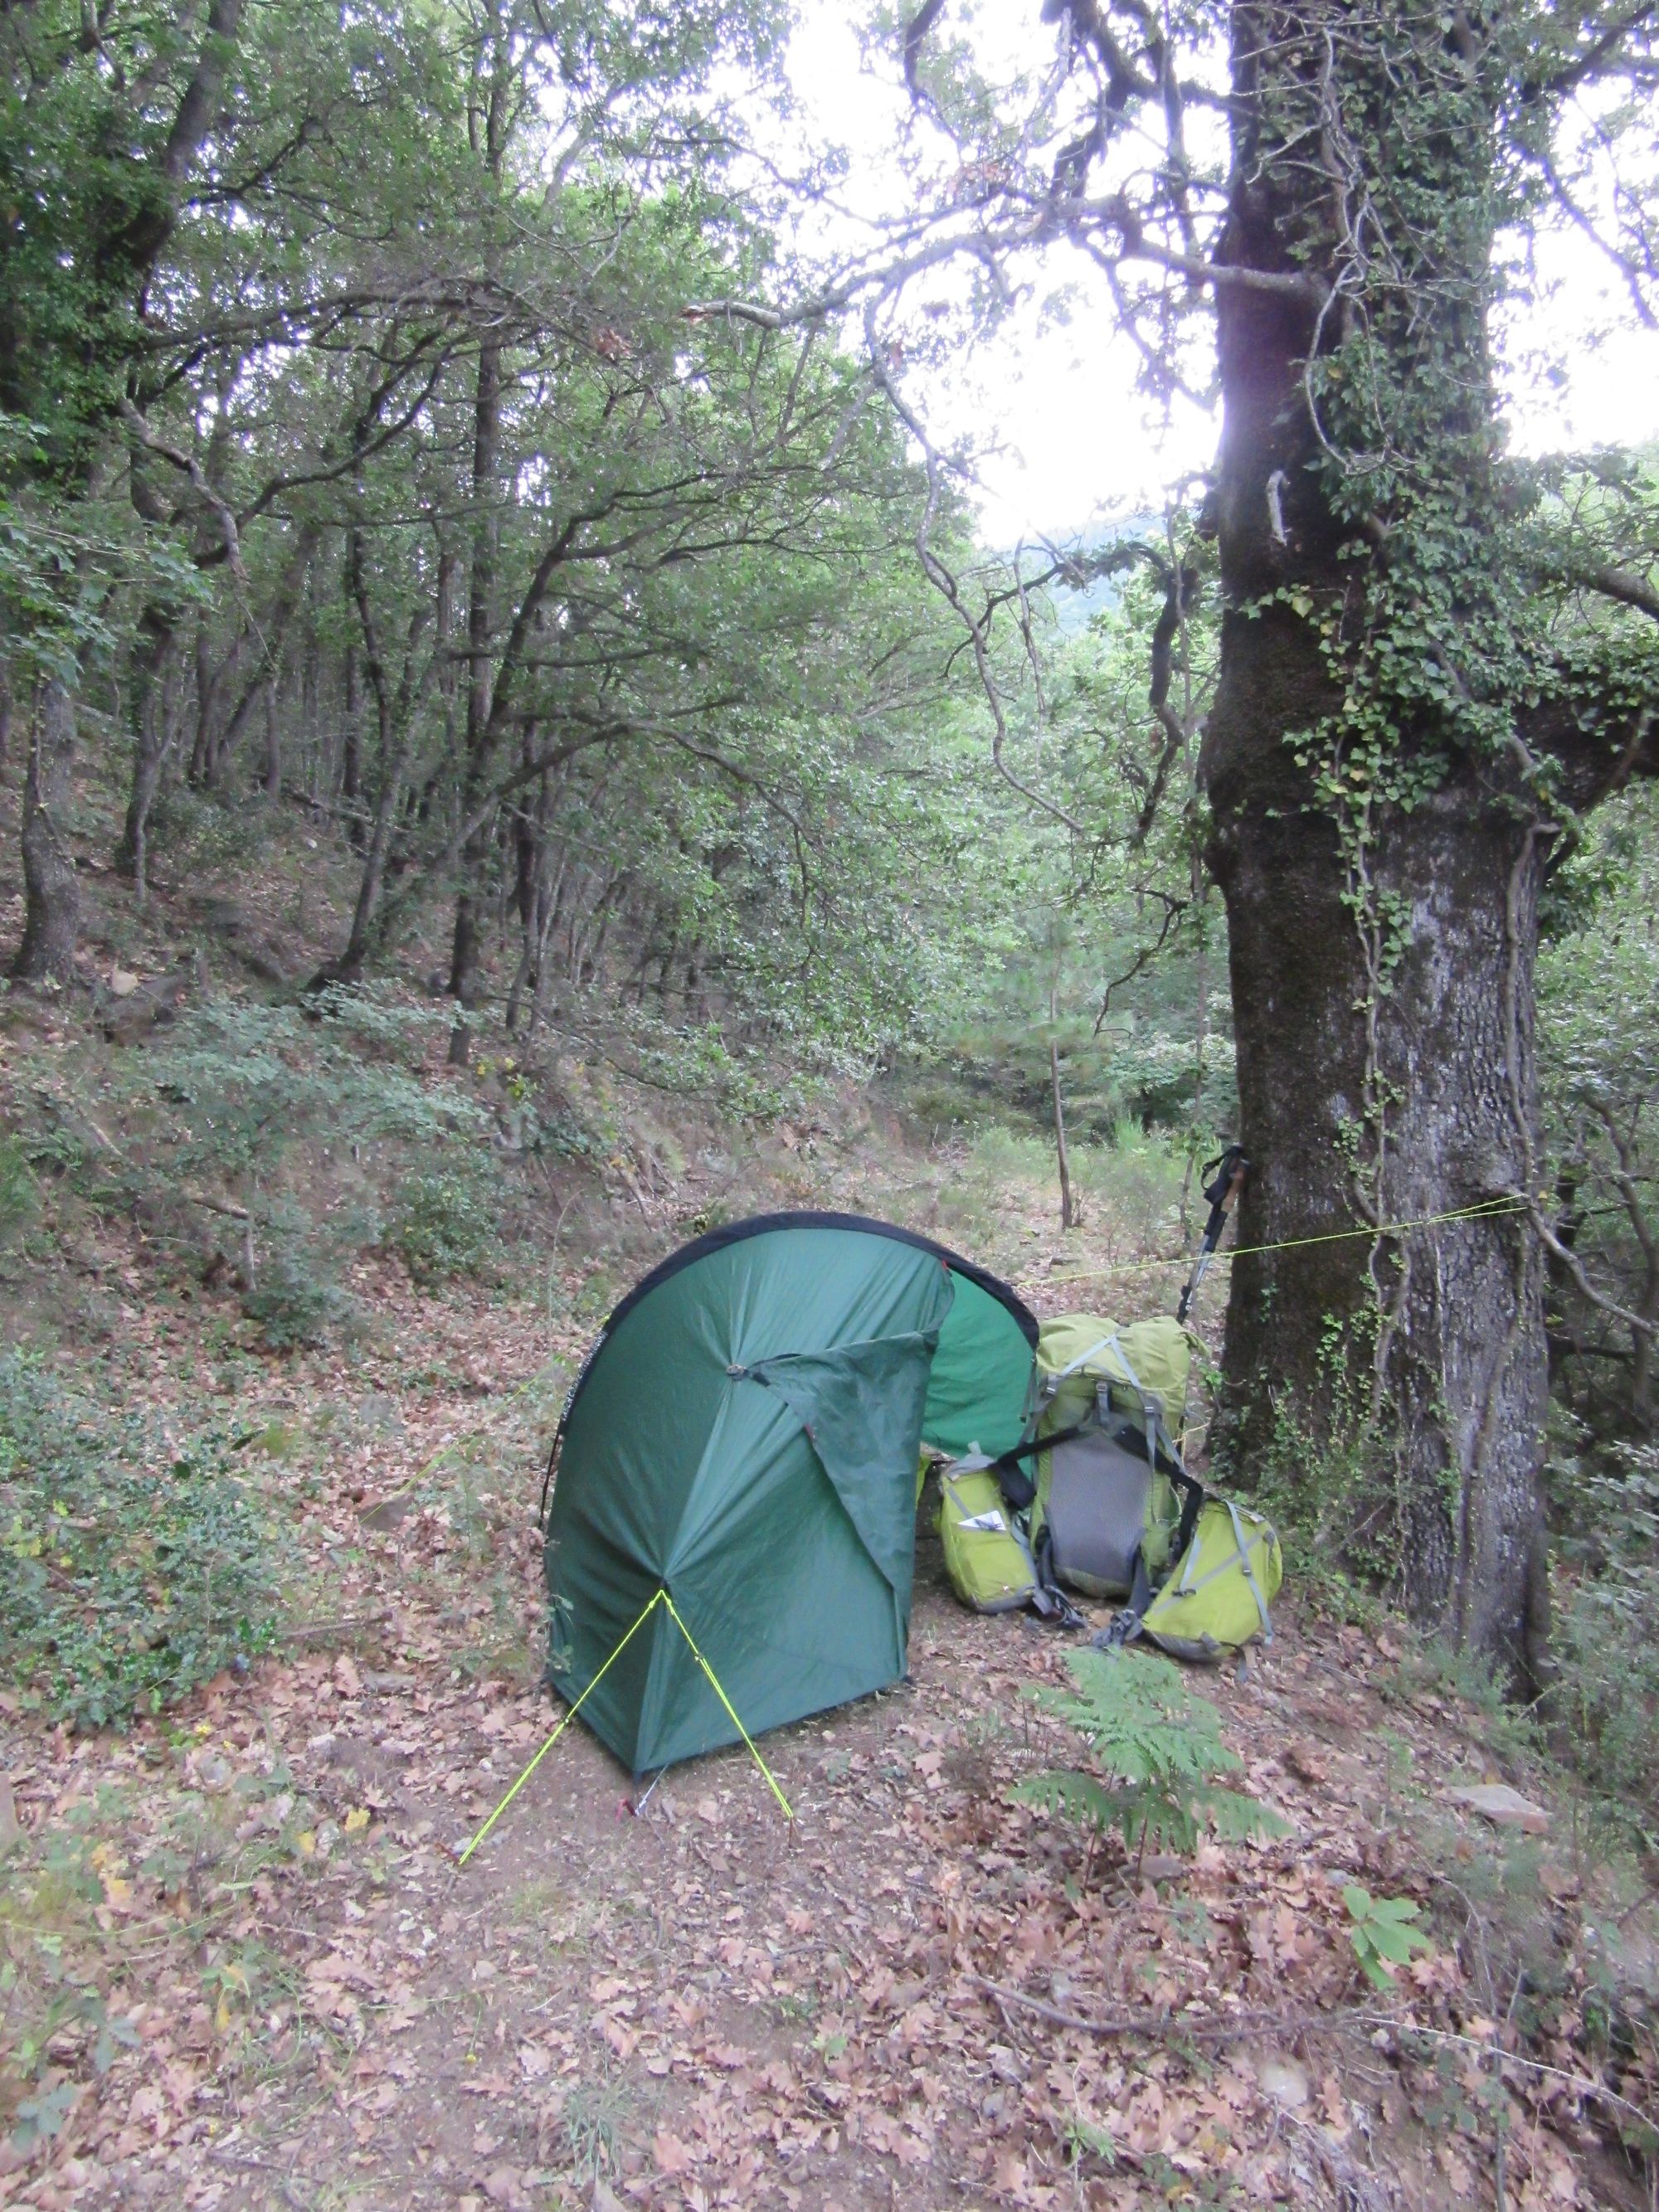 Camped on a bit of old track in the sloping forest above Le Perthus.